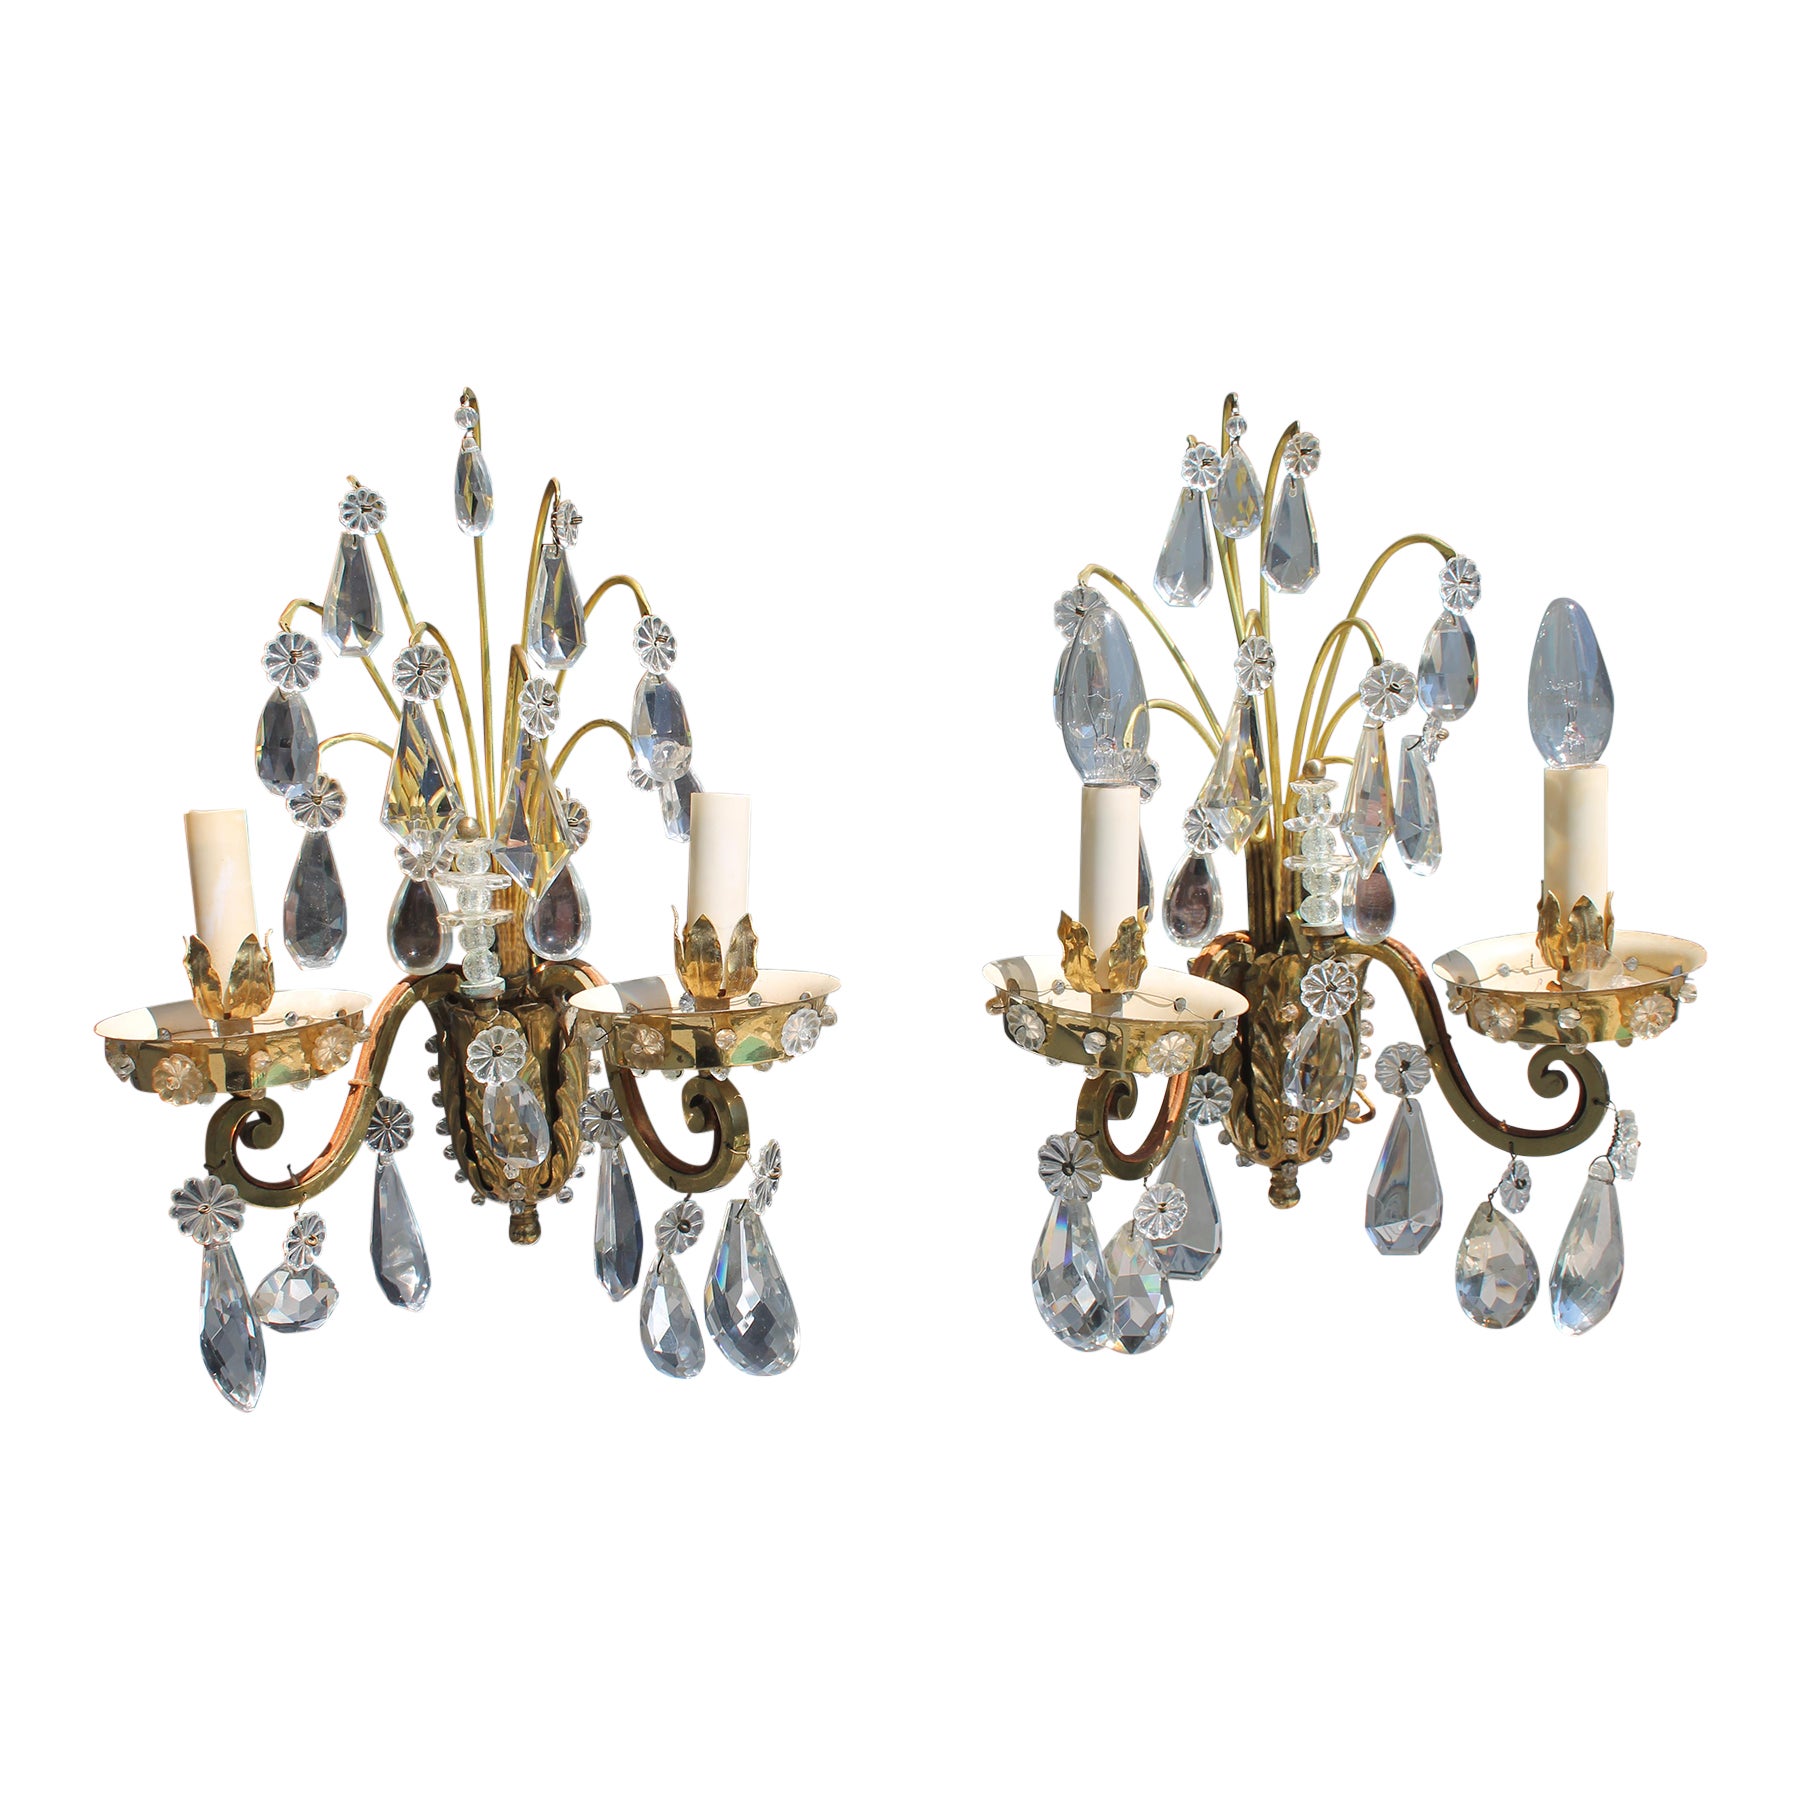 1950s French Hollywood Regency Gilt Bronze w/ Crystal Wall Sconces Maison Bagues For Sale